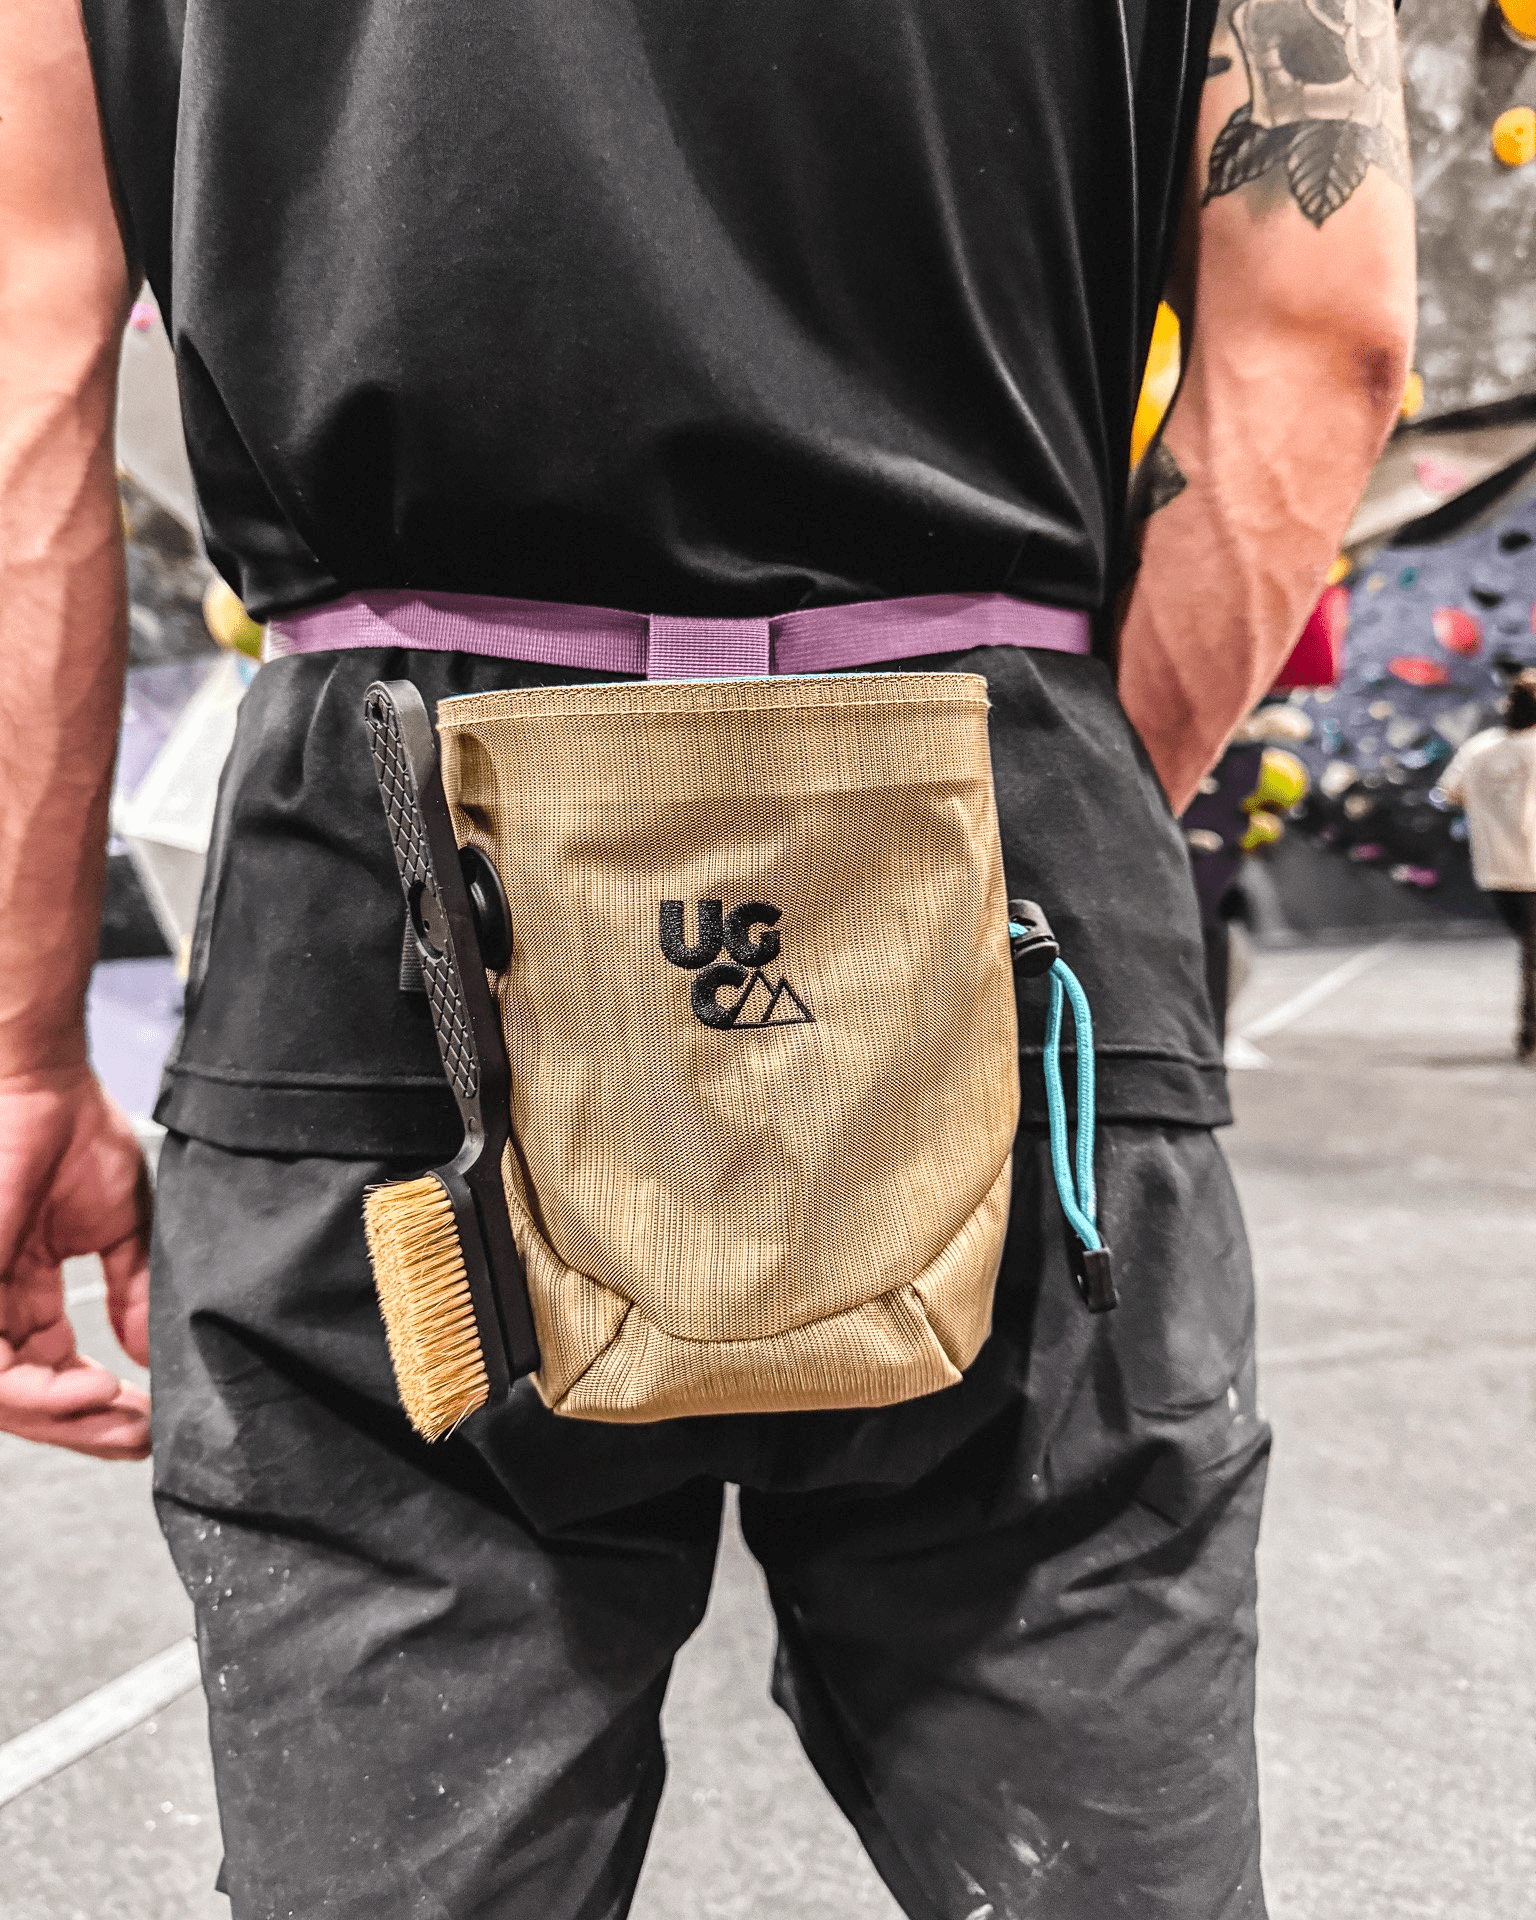 Tan and Purple Underground Climbing Chalk Bag On a Man in the Climbing Gym